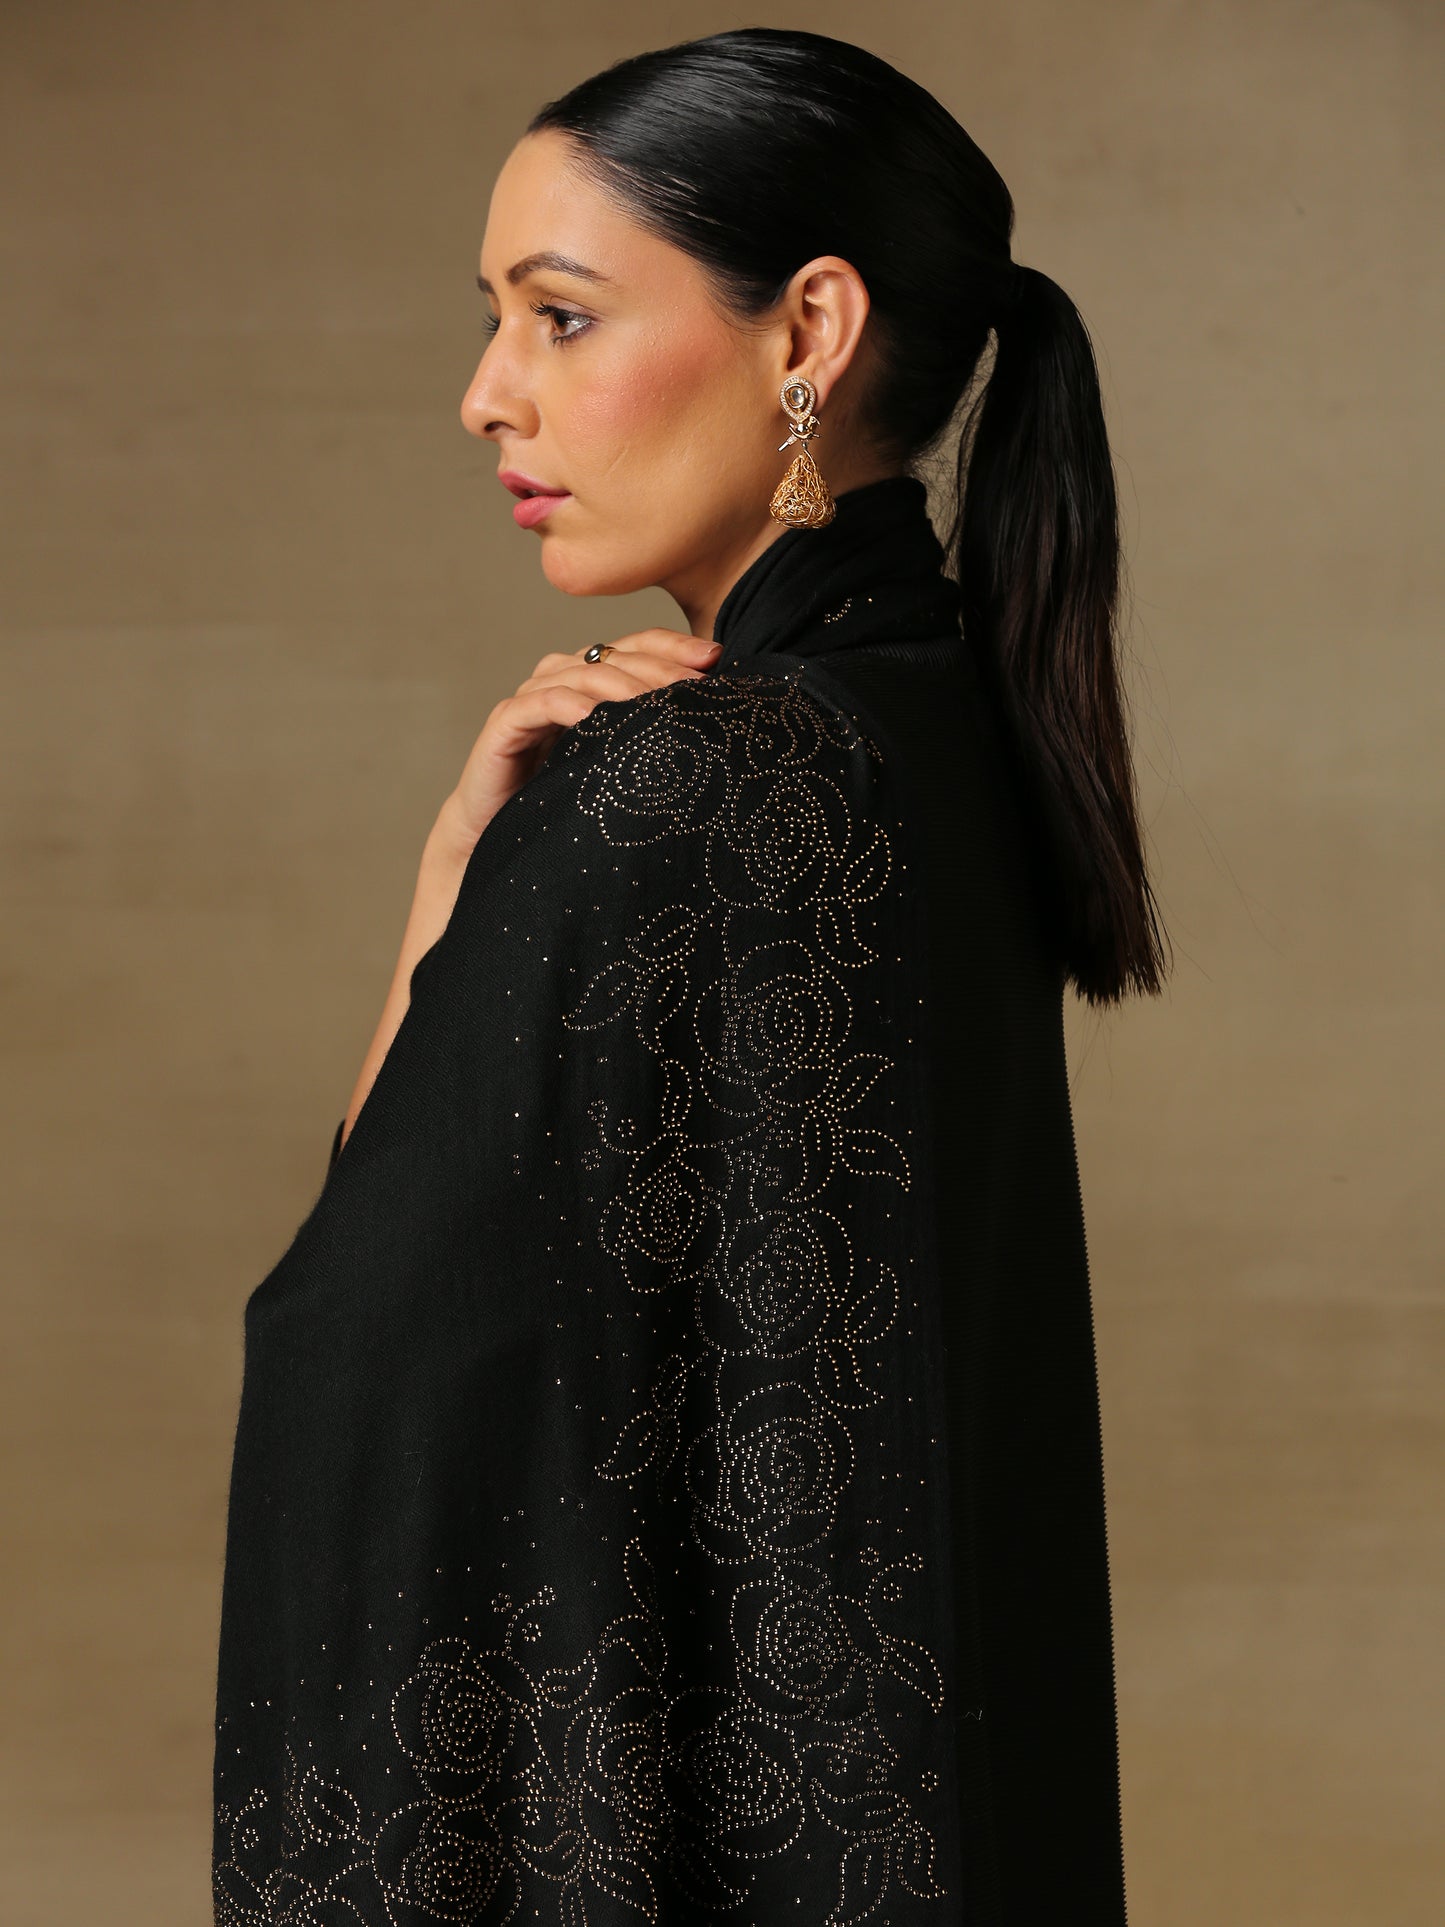 Model is wearing a black stole from the Era of Zaywar Border Swarovski Stole collection, hand embellished with gold swarovski in a roses design